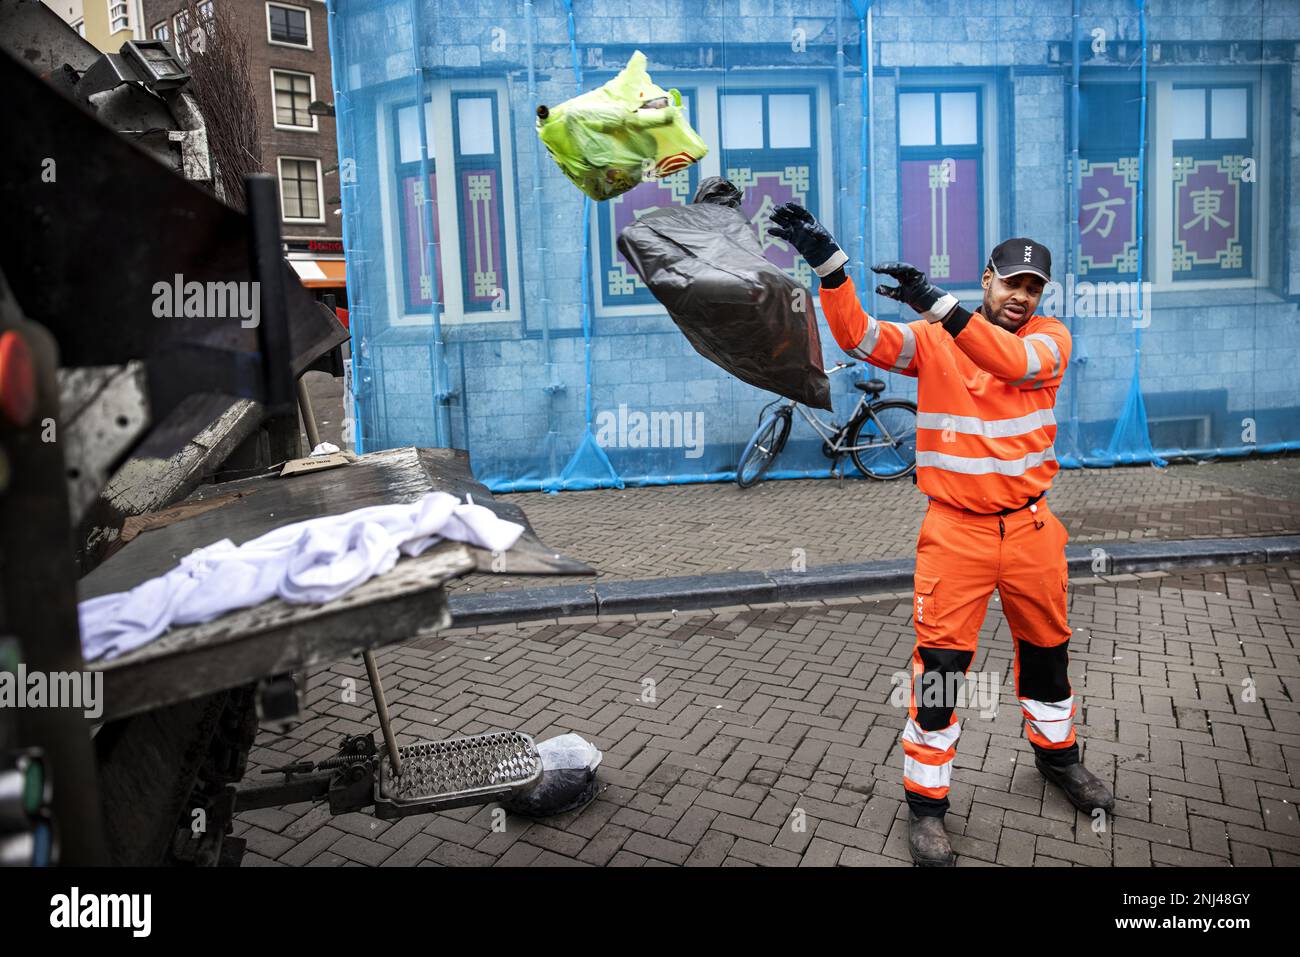 AMSTERDAM - Garbage collectors are cleaning up the center of Amsterdam  after Dutch municipalities and trade unions have reached an agreement in  principle on a new collective labor agreement for municipal employees.